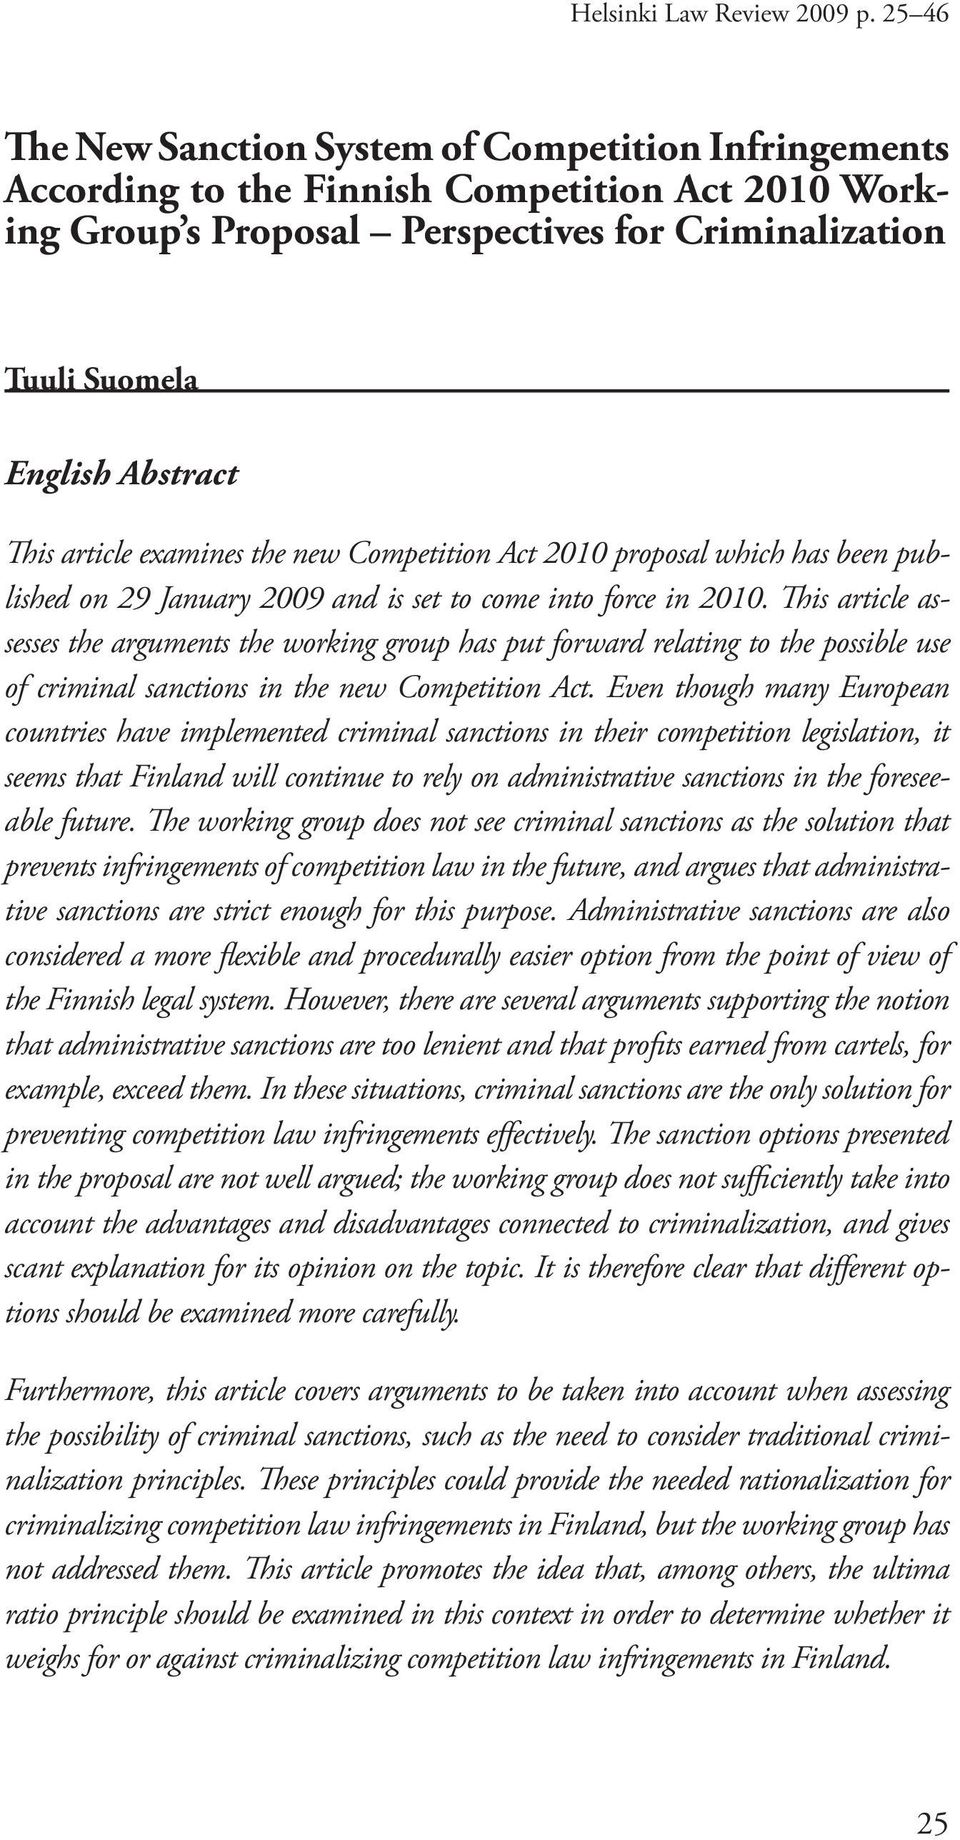 article examines the new Competition Act 2010 proposal which has been published on 29 January 2009 and is set to come into force in 2010.